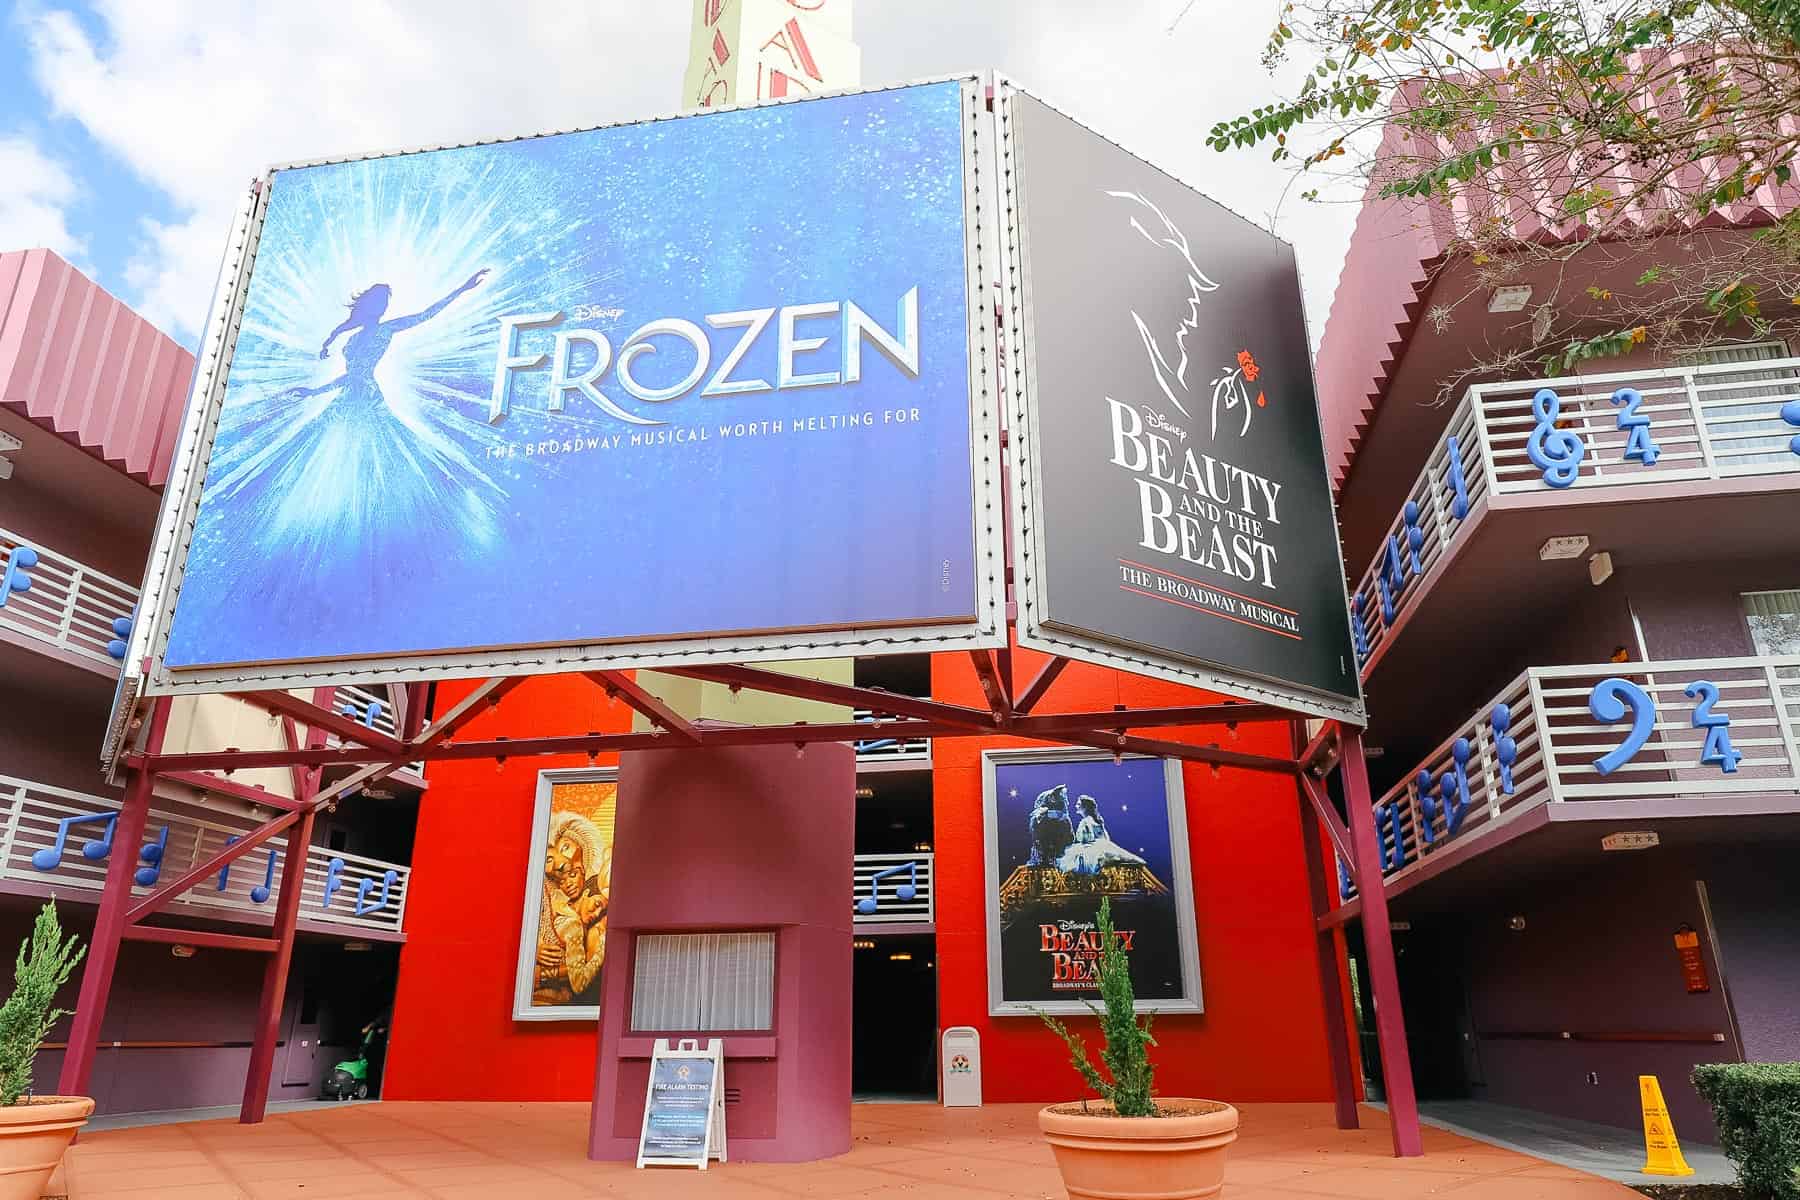 Frozen and Beauty and the Beast billboards in Broadway Hotel 